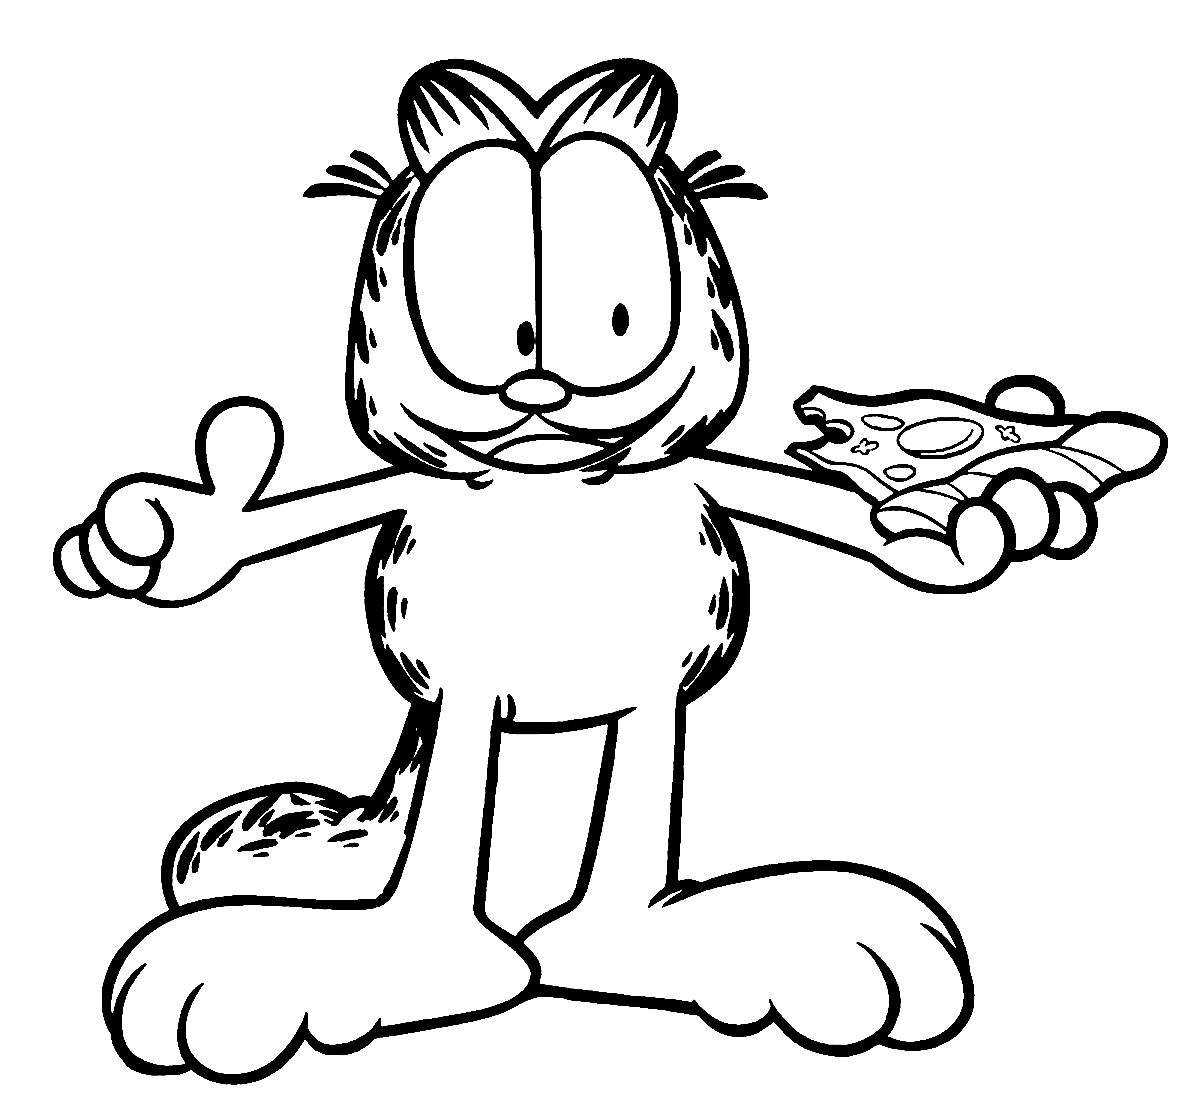 Colouring funny garfield